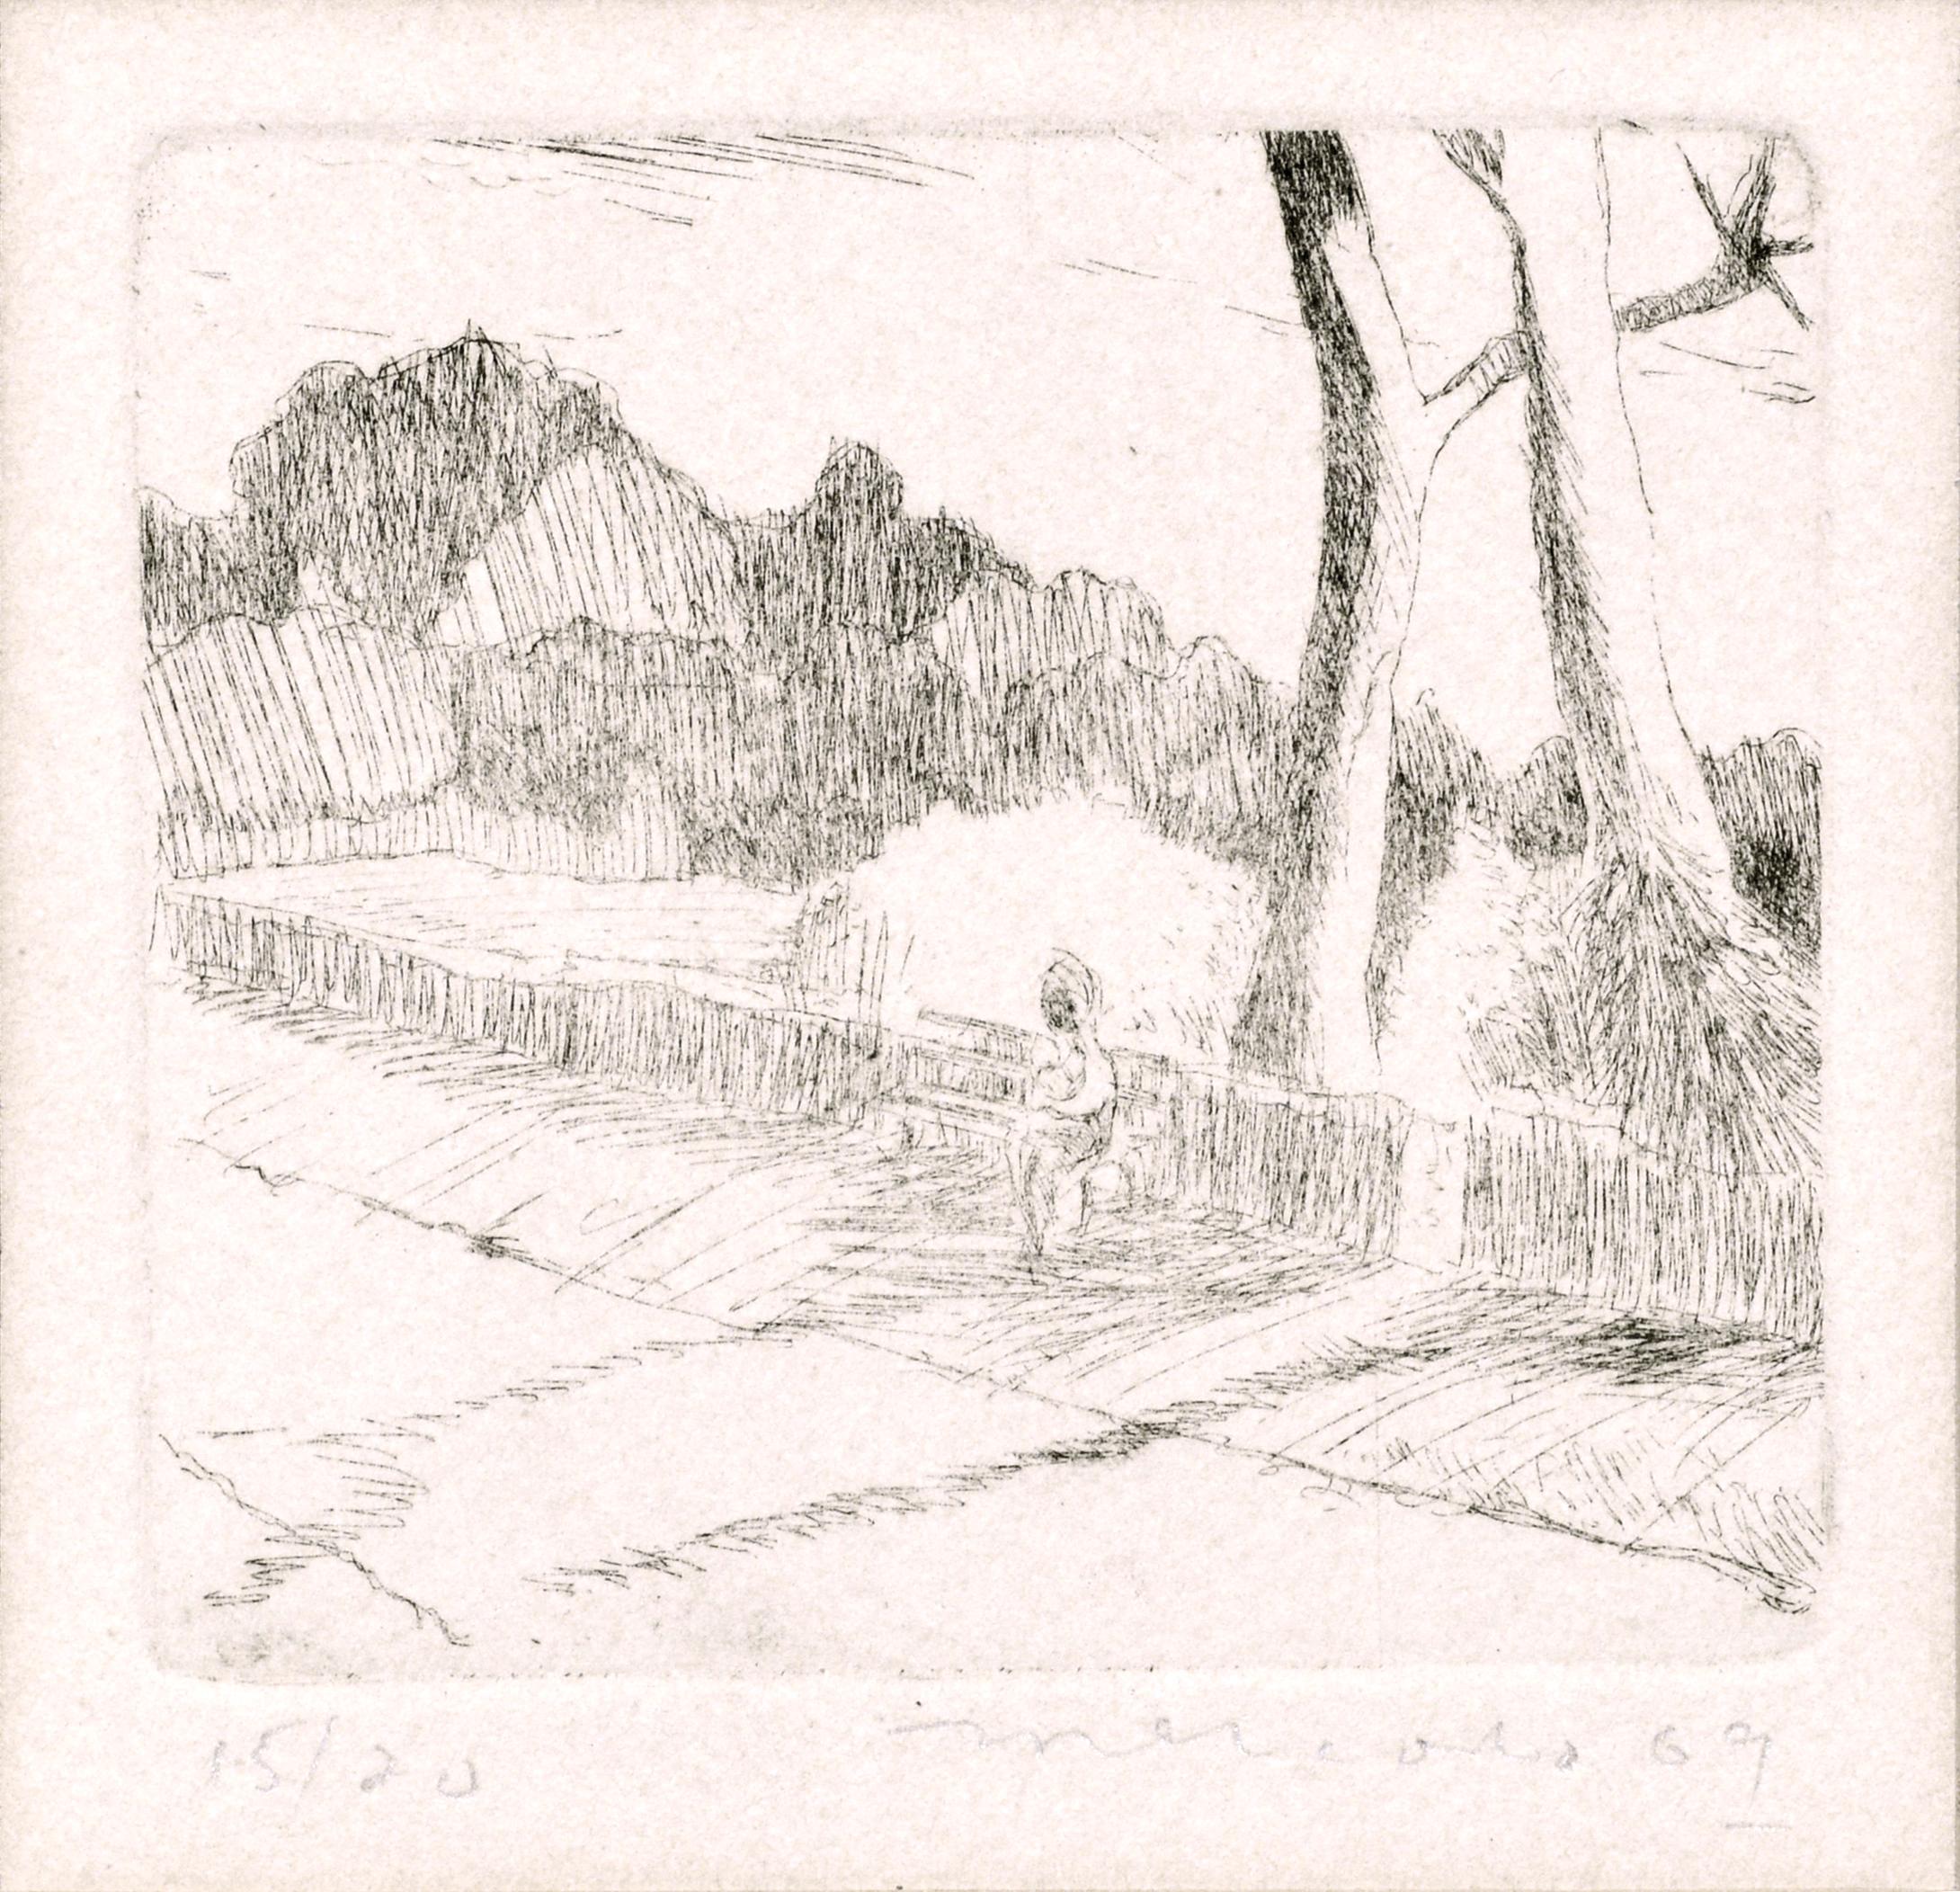 Sitting on a Park Bench - Figurative Landscape Lithograph - Print by Mercado